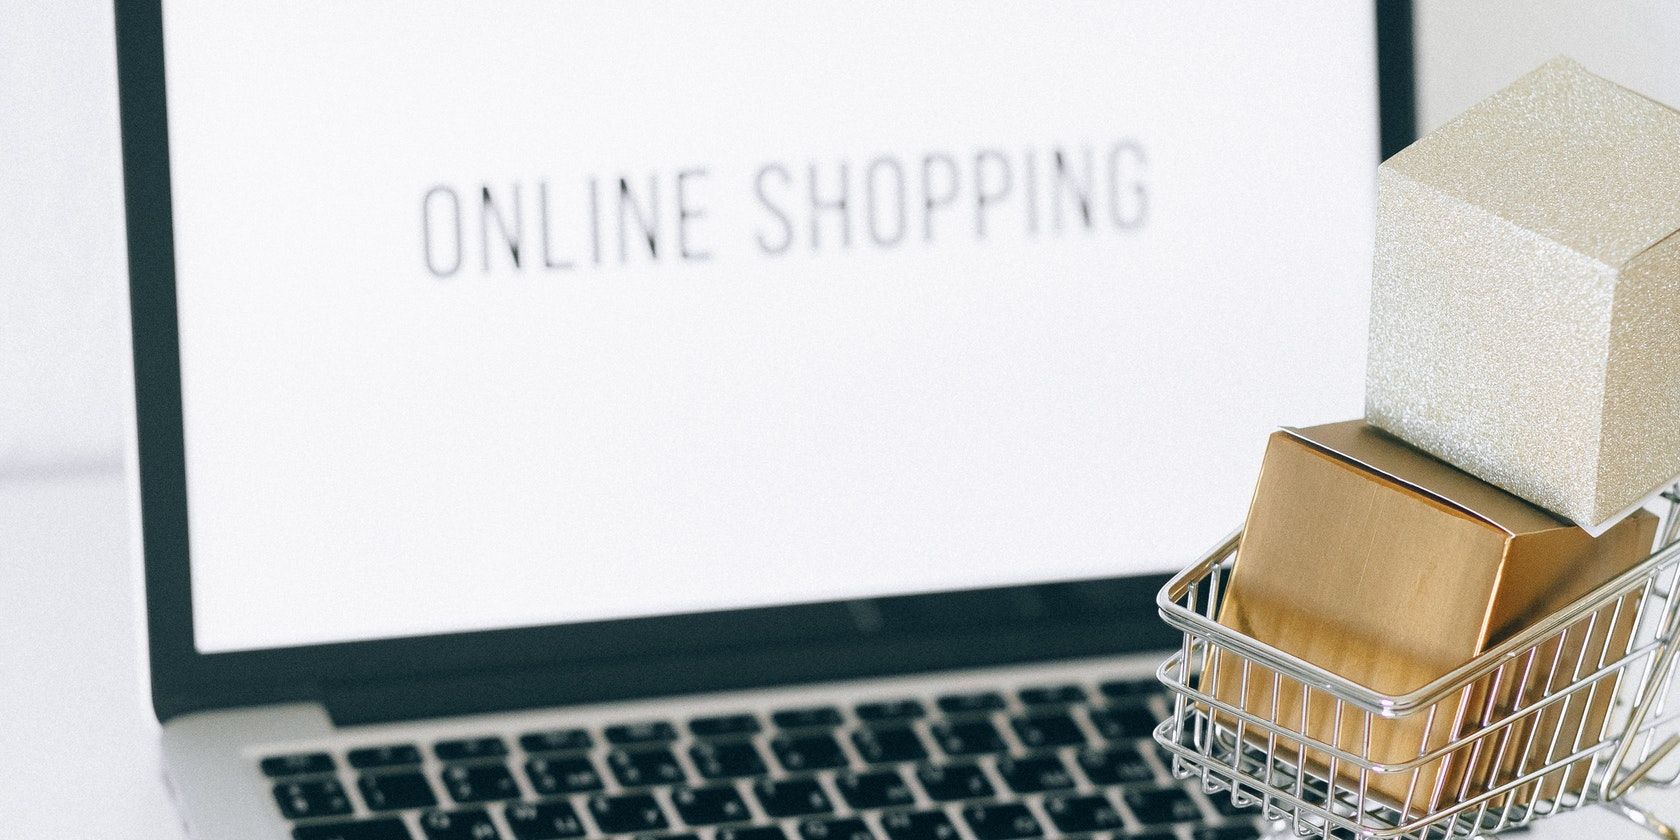 Picture of a laptop with online shopping written on its screen, and a model shopping cart nearby